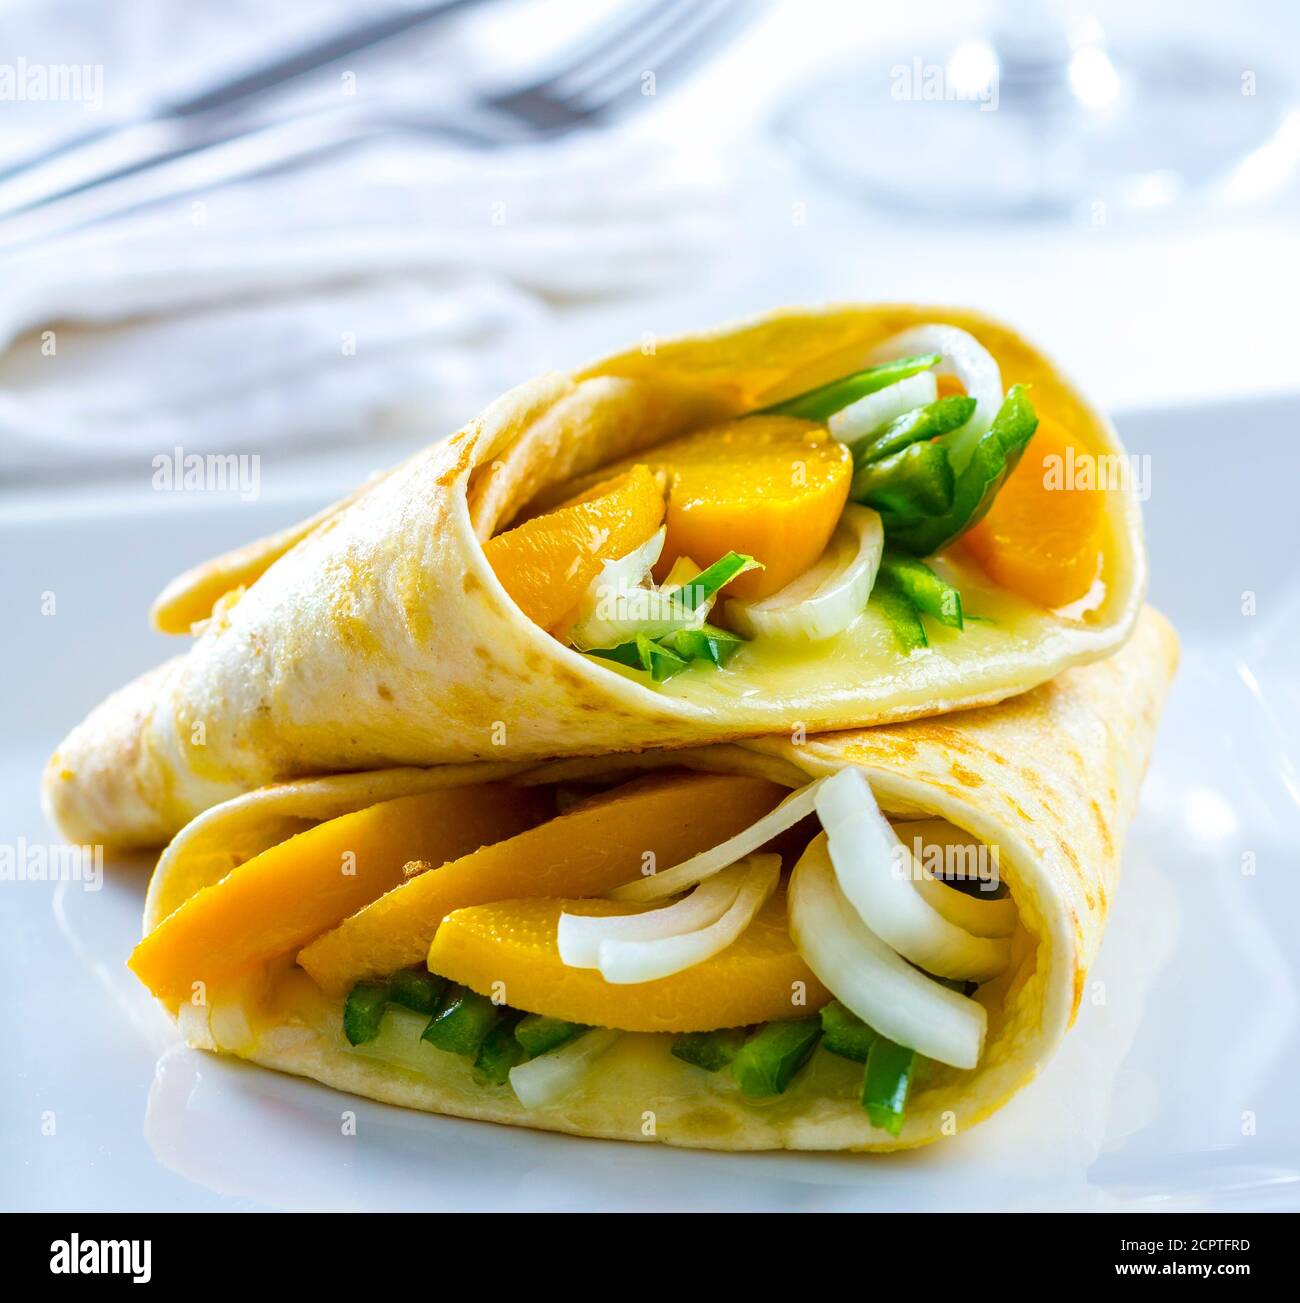 Delicious vegetarian wrap with fruit, vegetables and cheese. Stock Photo